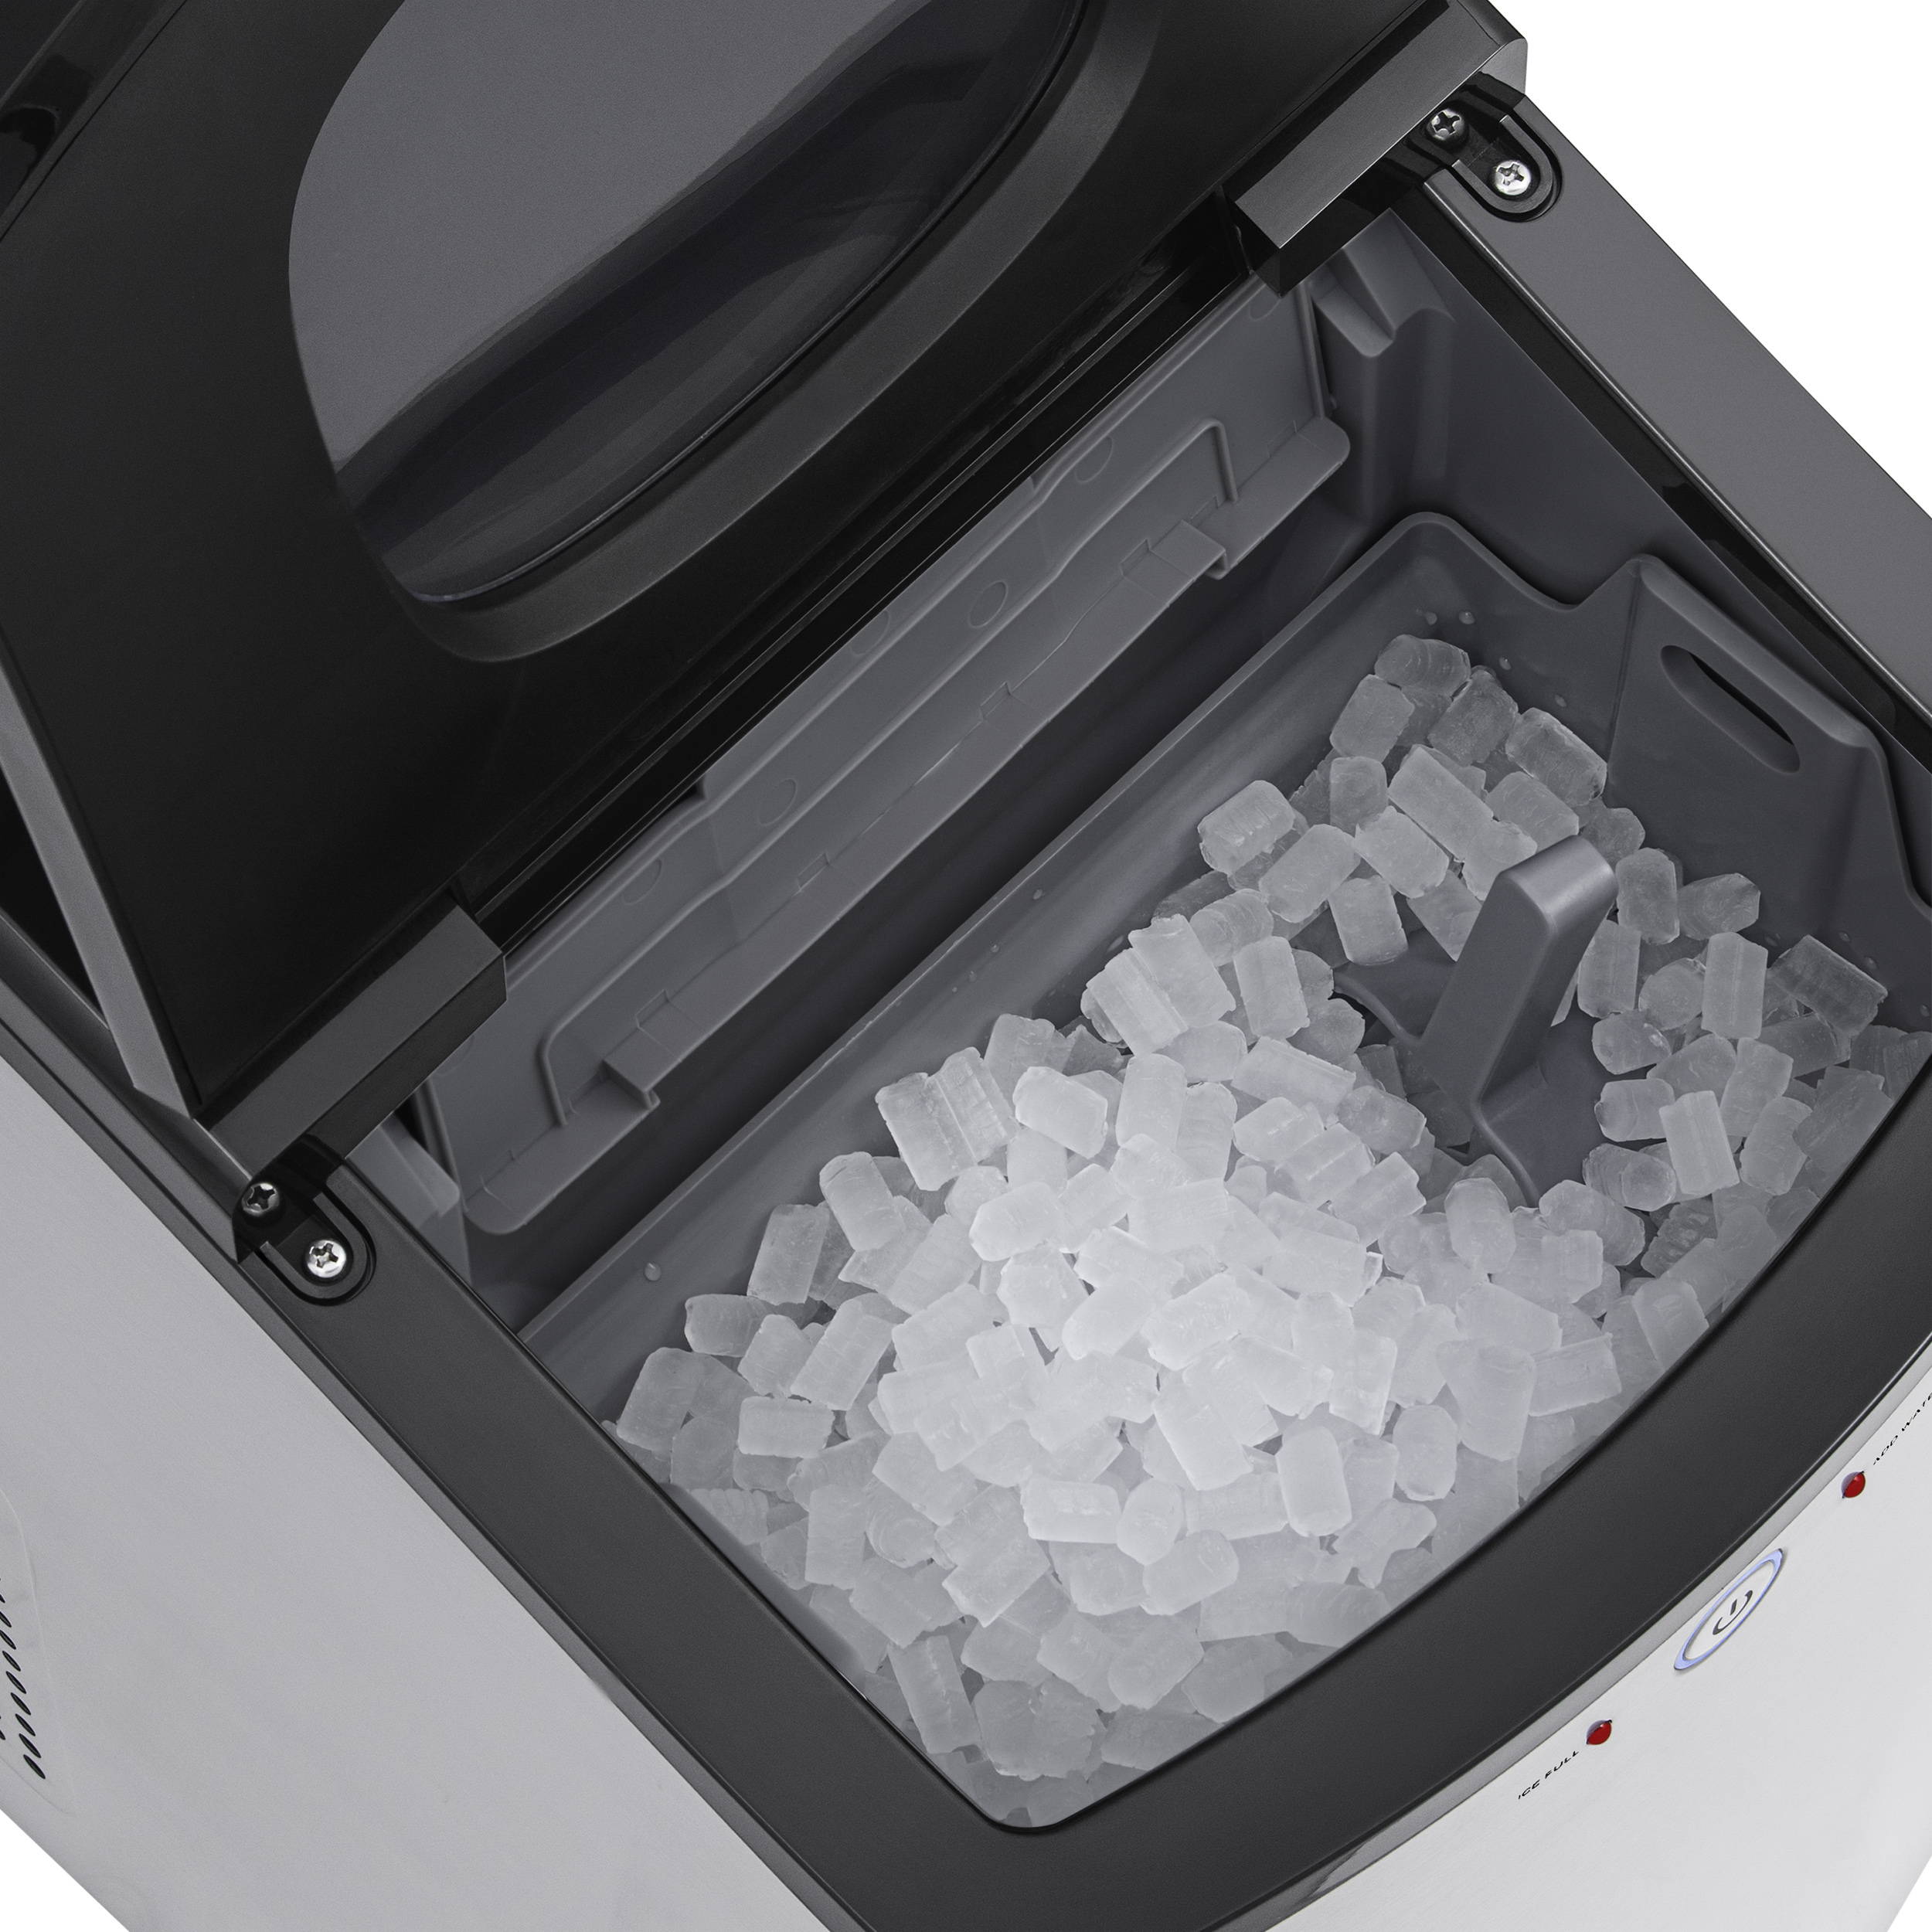 The NewAir Nugget Ice Maker: The “Good Ice” Has Never Tasted So Good